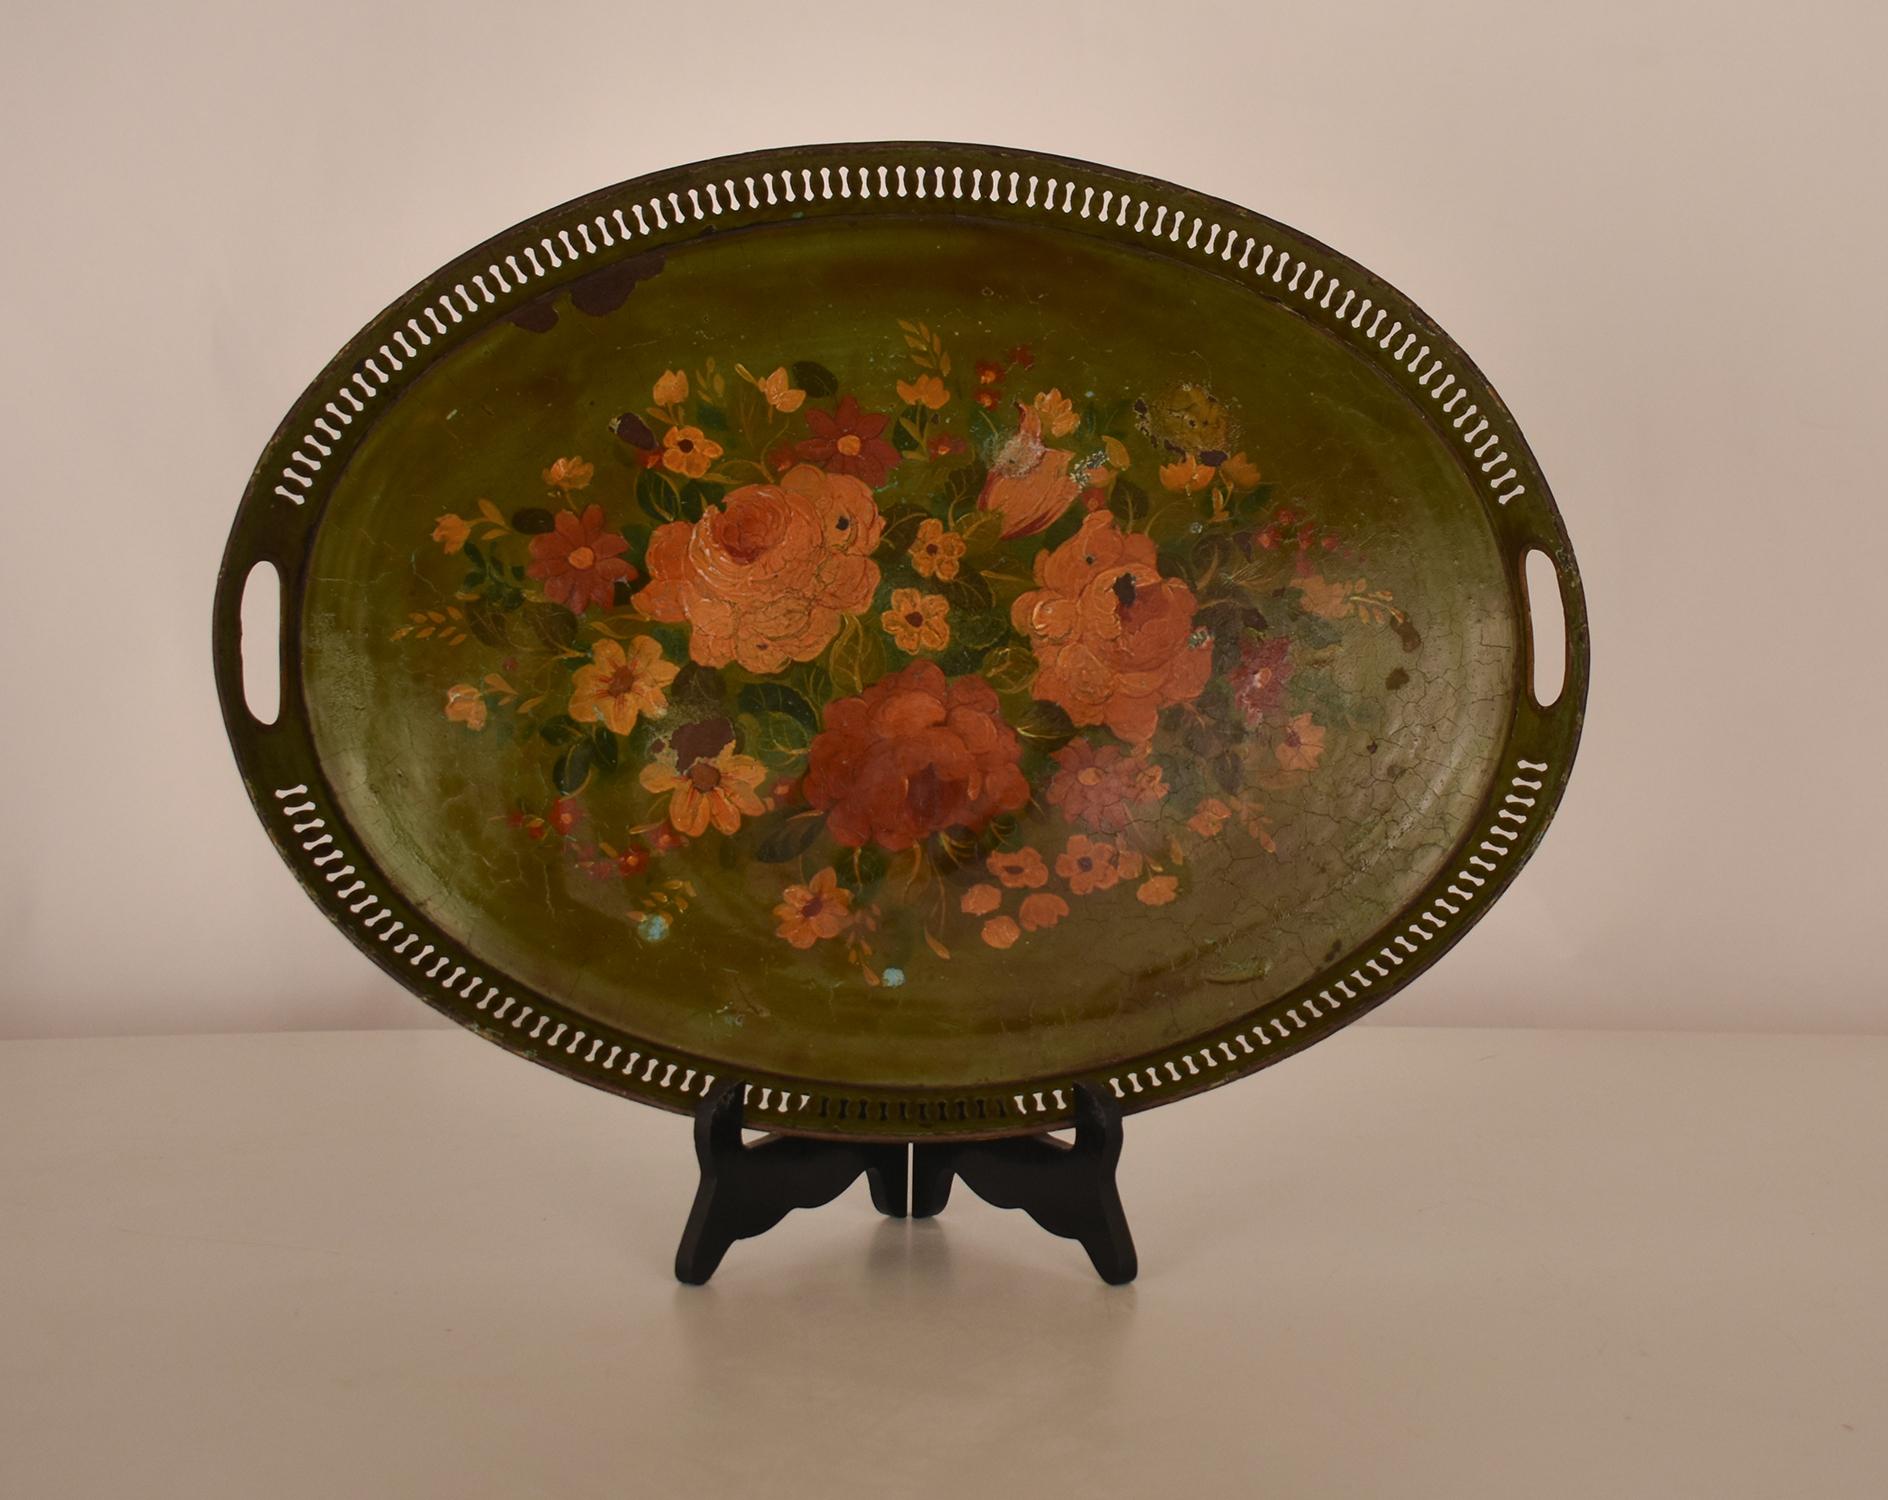 An antique French oval-shaped tray, made of metal and painted with flowers on its surface, with a green background. This particular tray is of French origin and dates back to 1960.